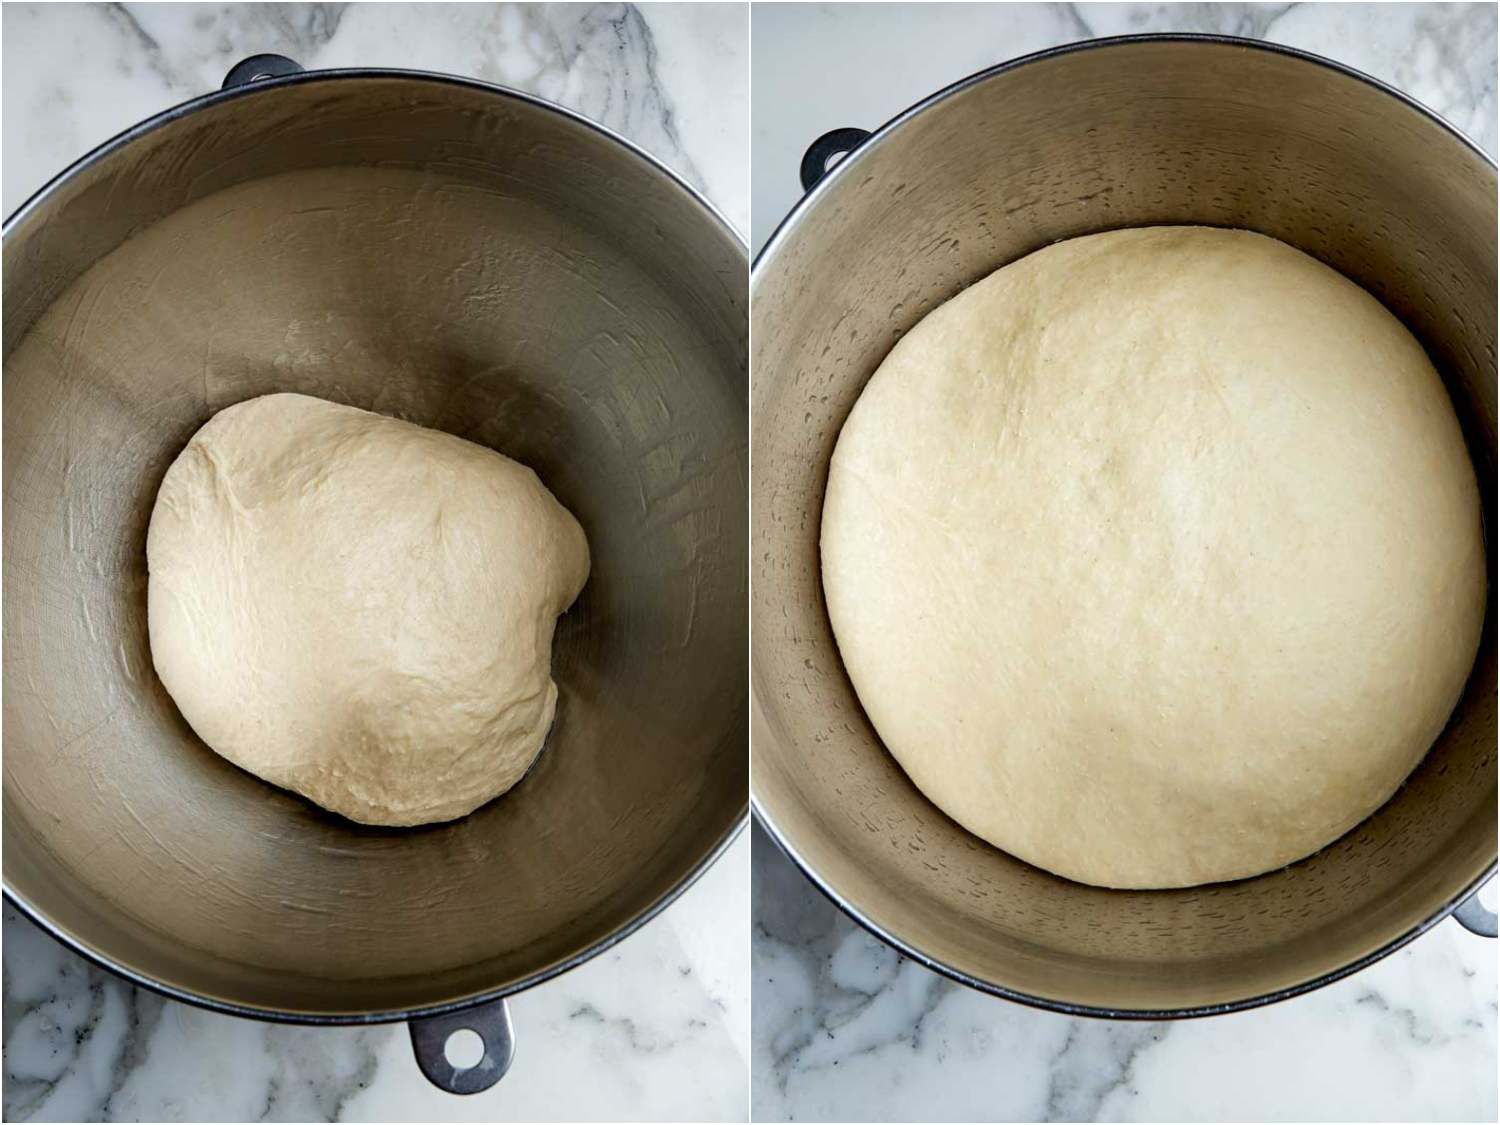 Apple cider doughnut dough before and after its first rise in the bowl, where it more than doubles in bulk